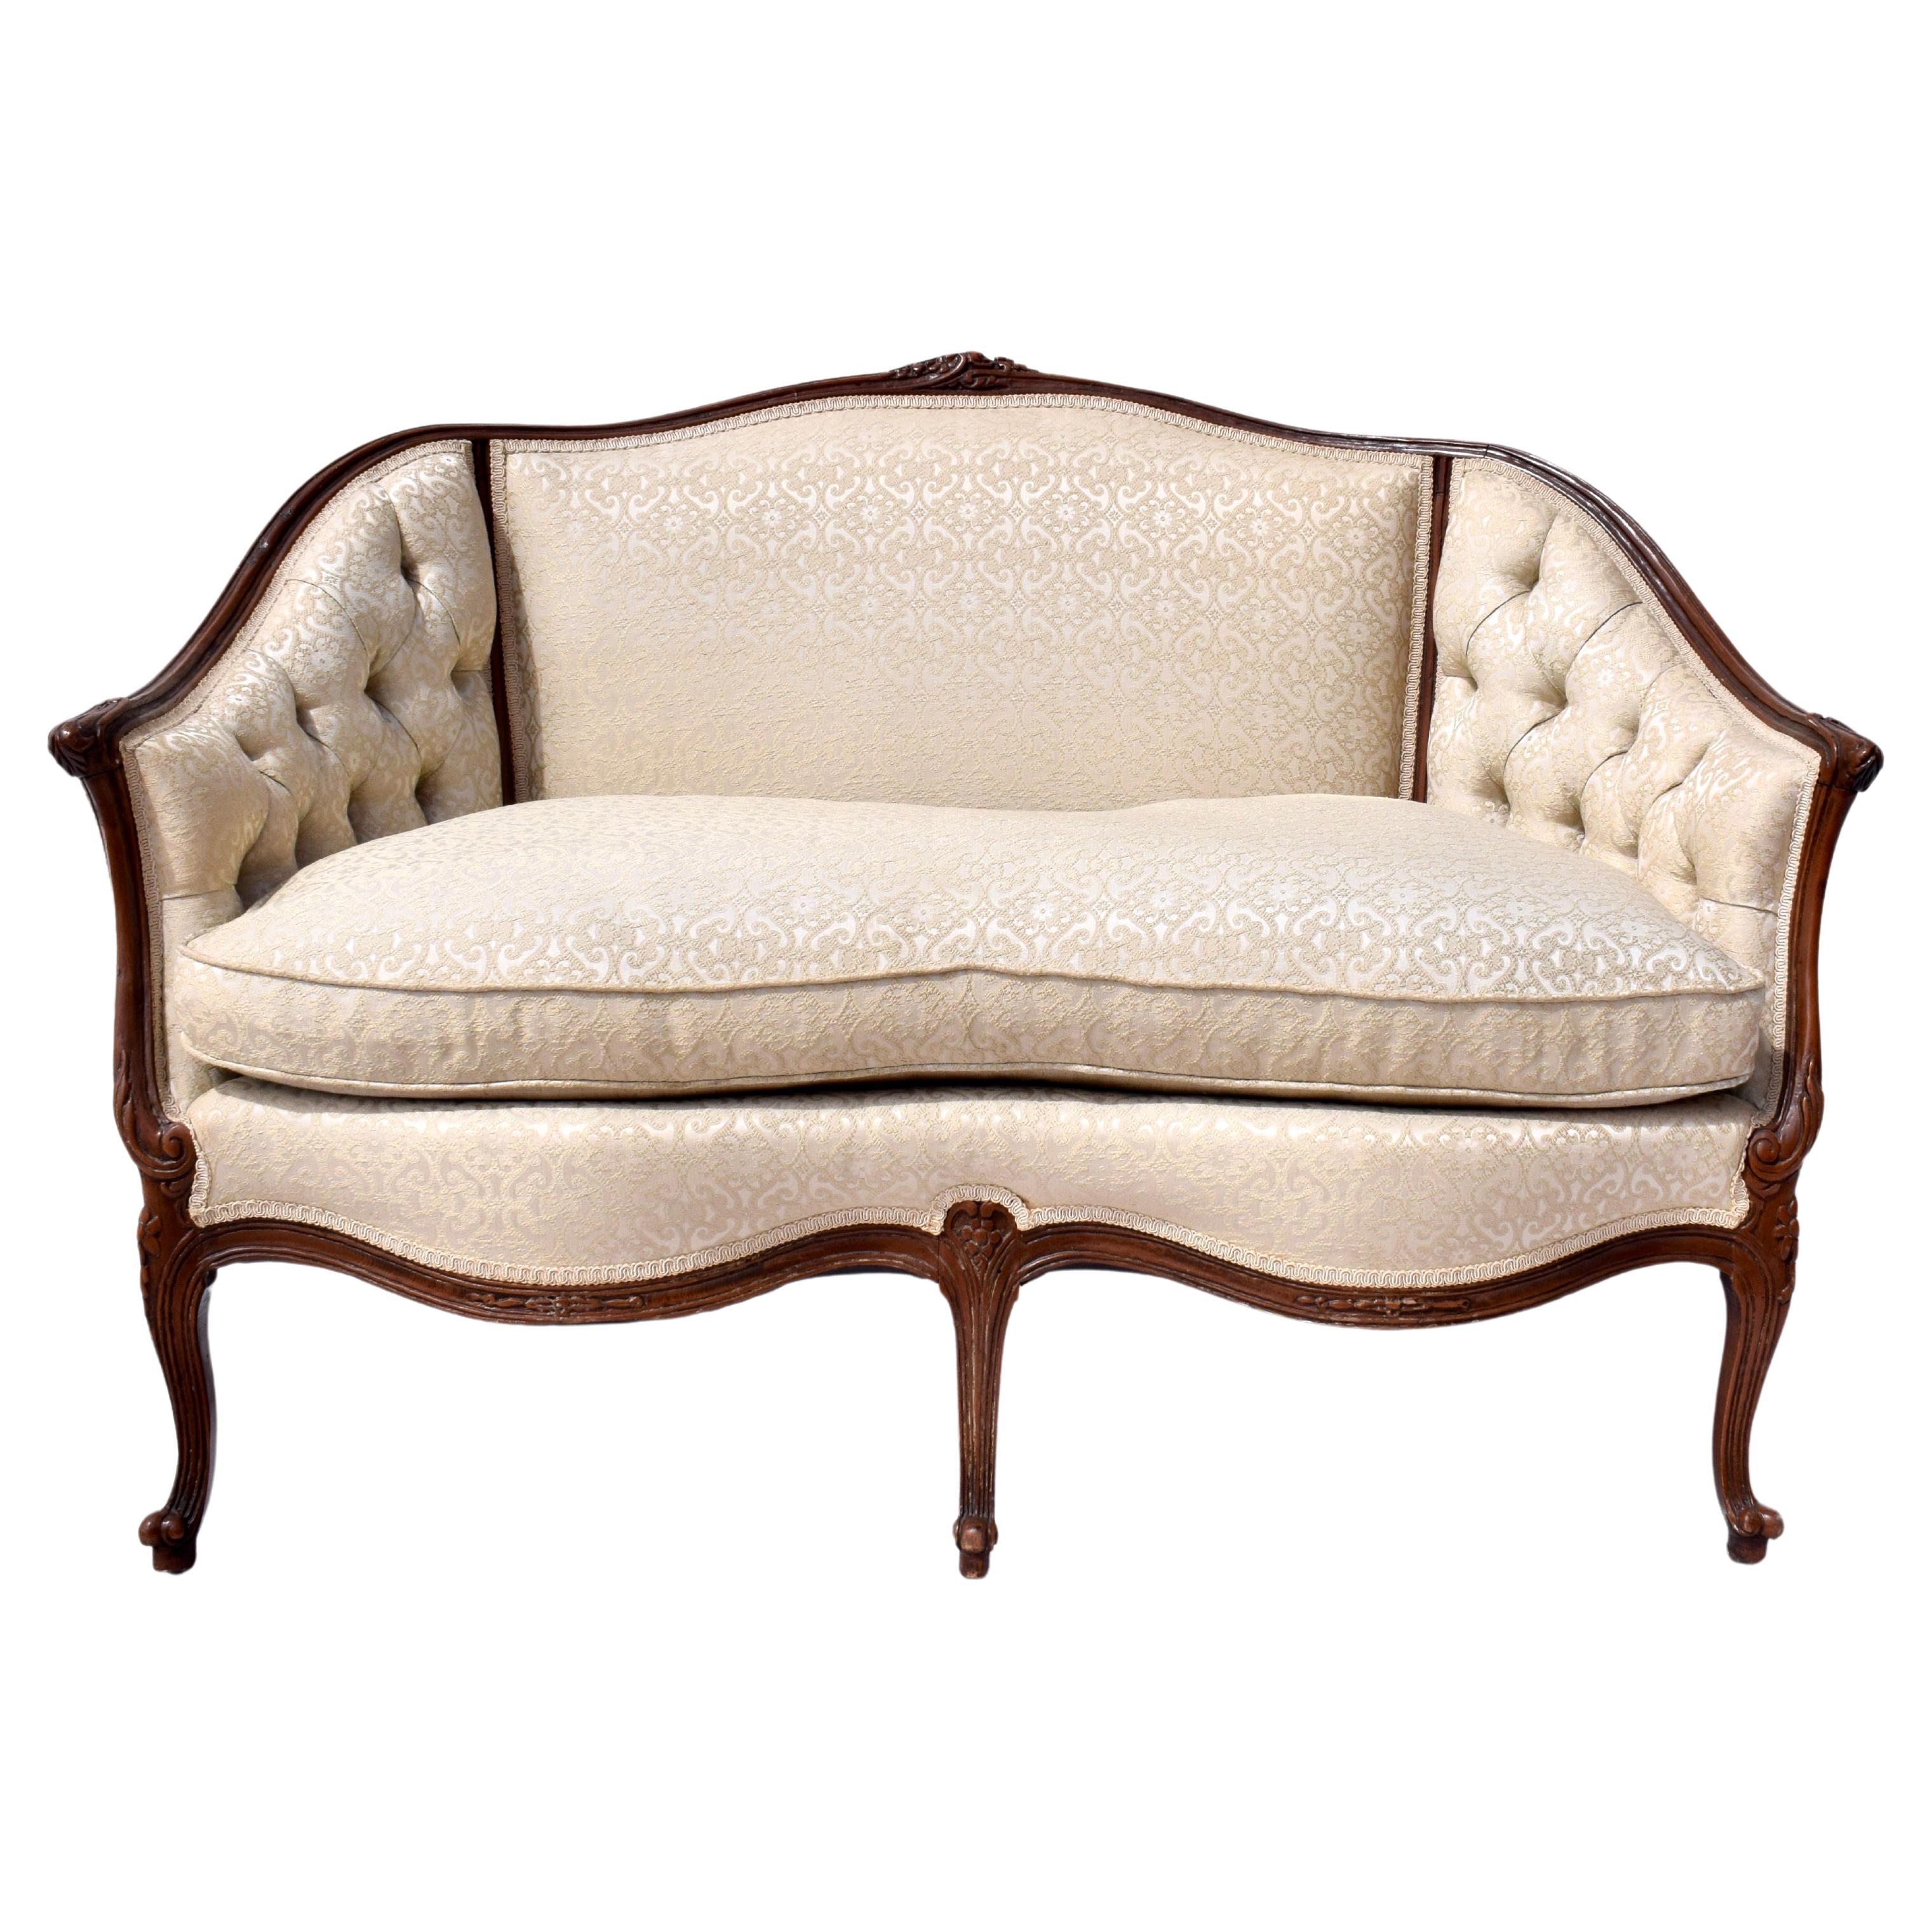 Louis XV Style French Canape Loveseat For Sale